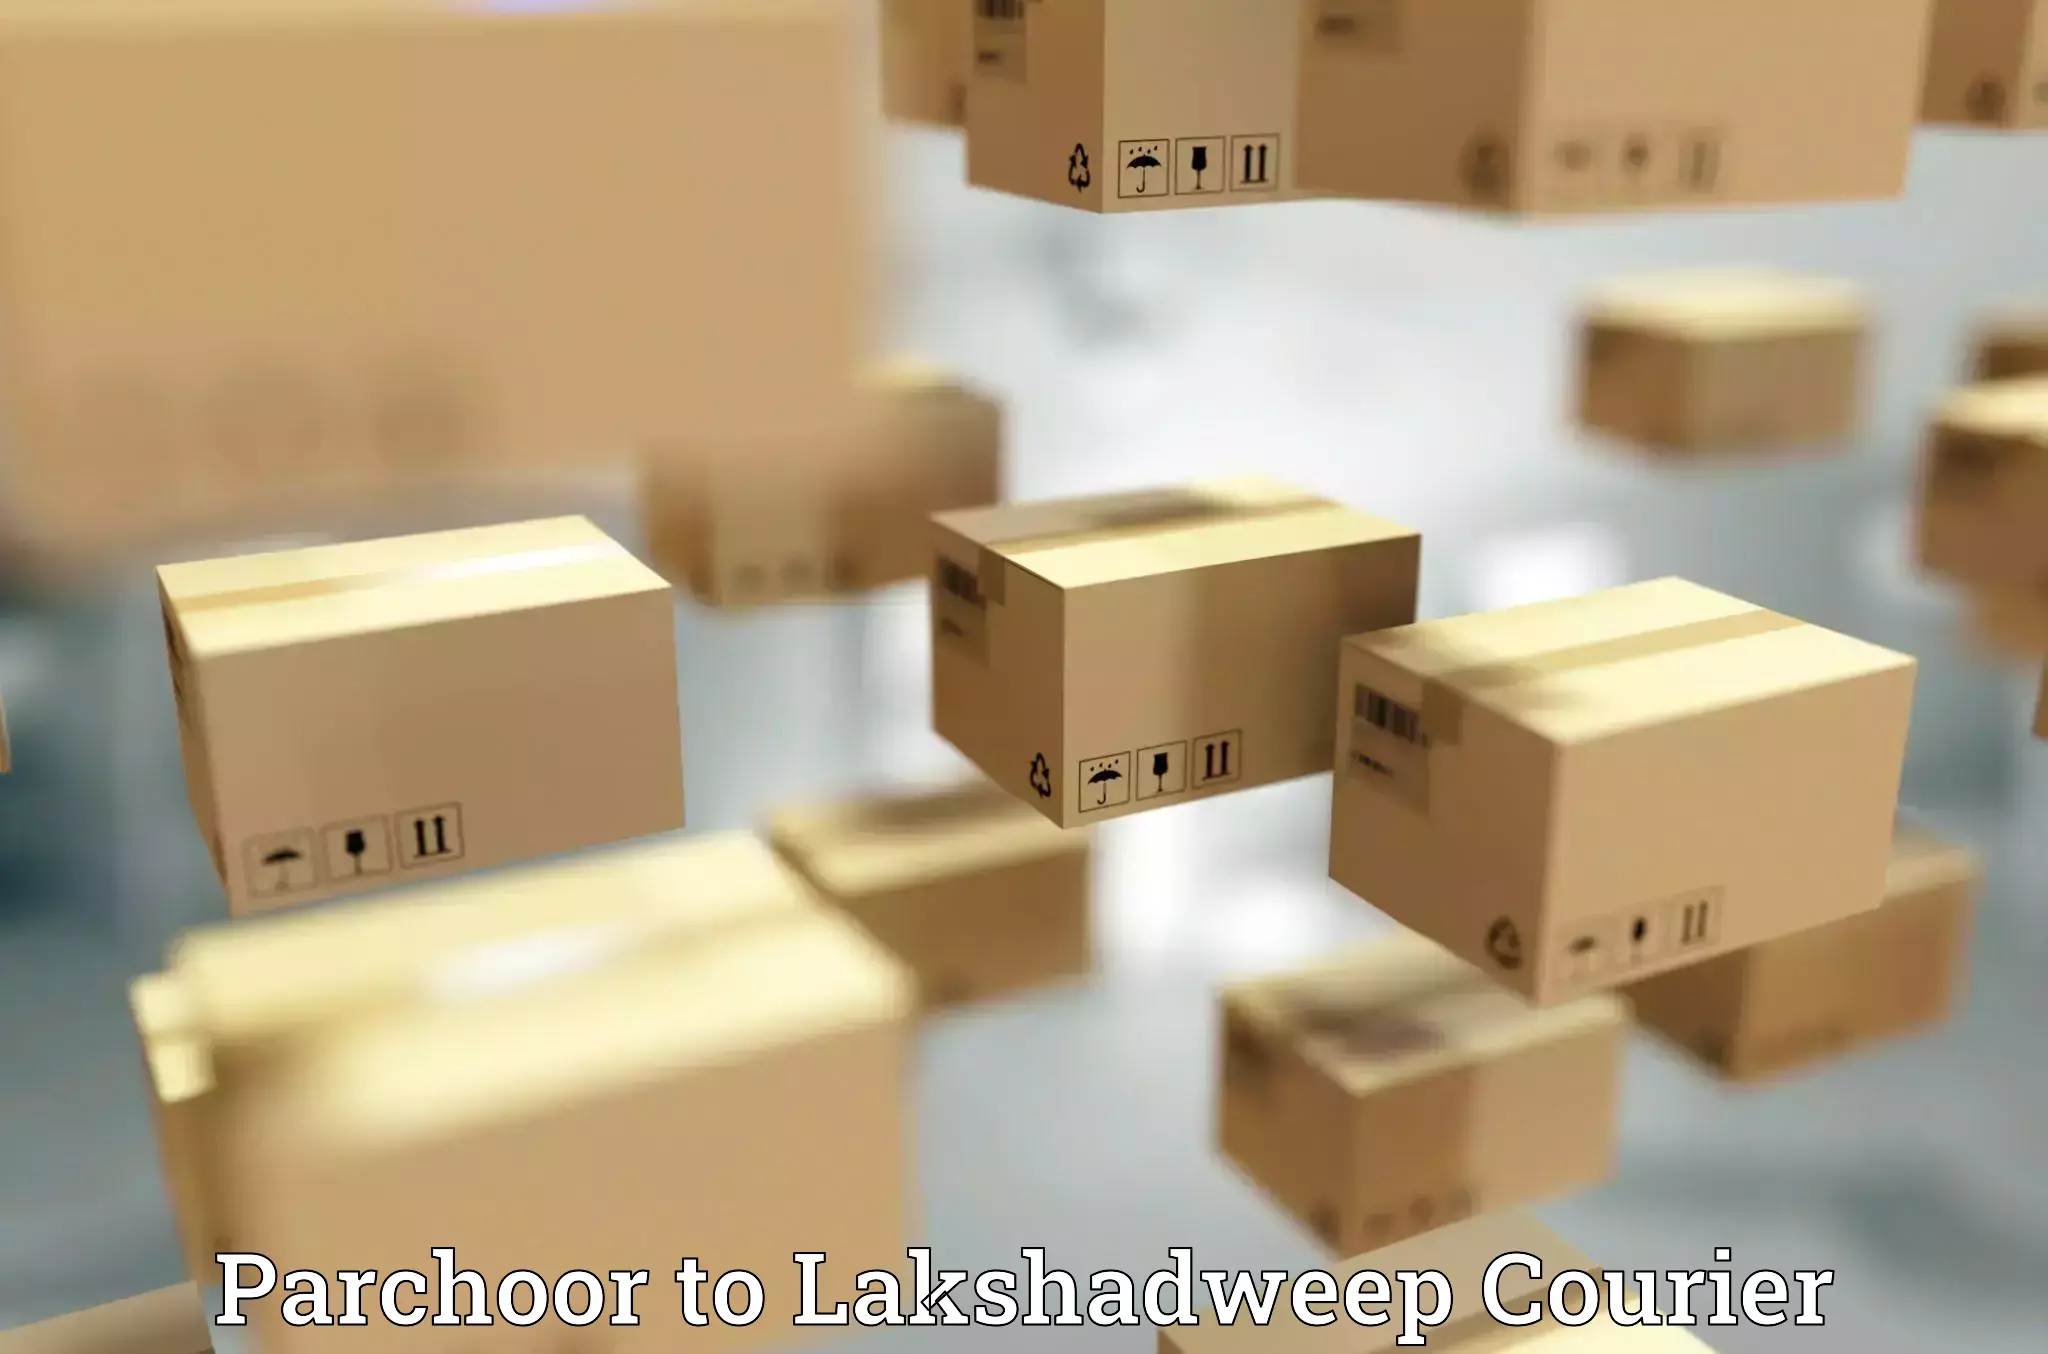 Package delivery network Parchoor to Lakshadweep